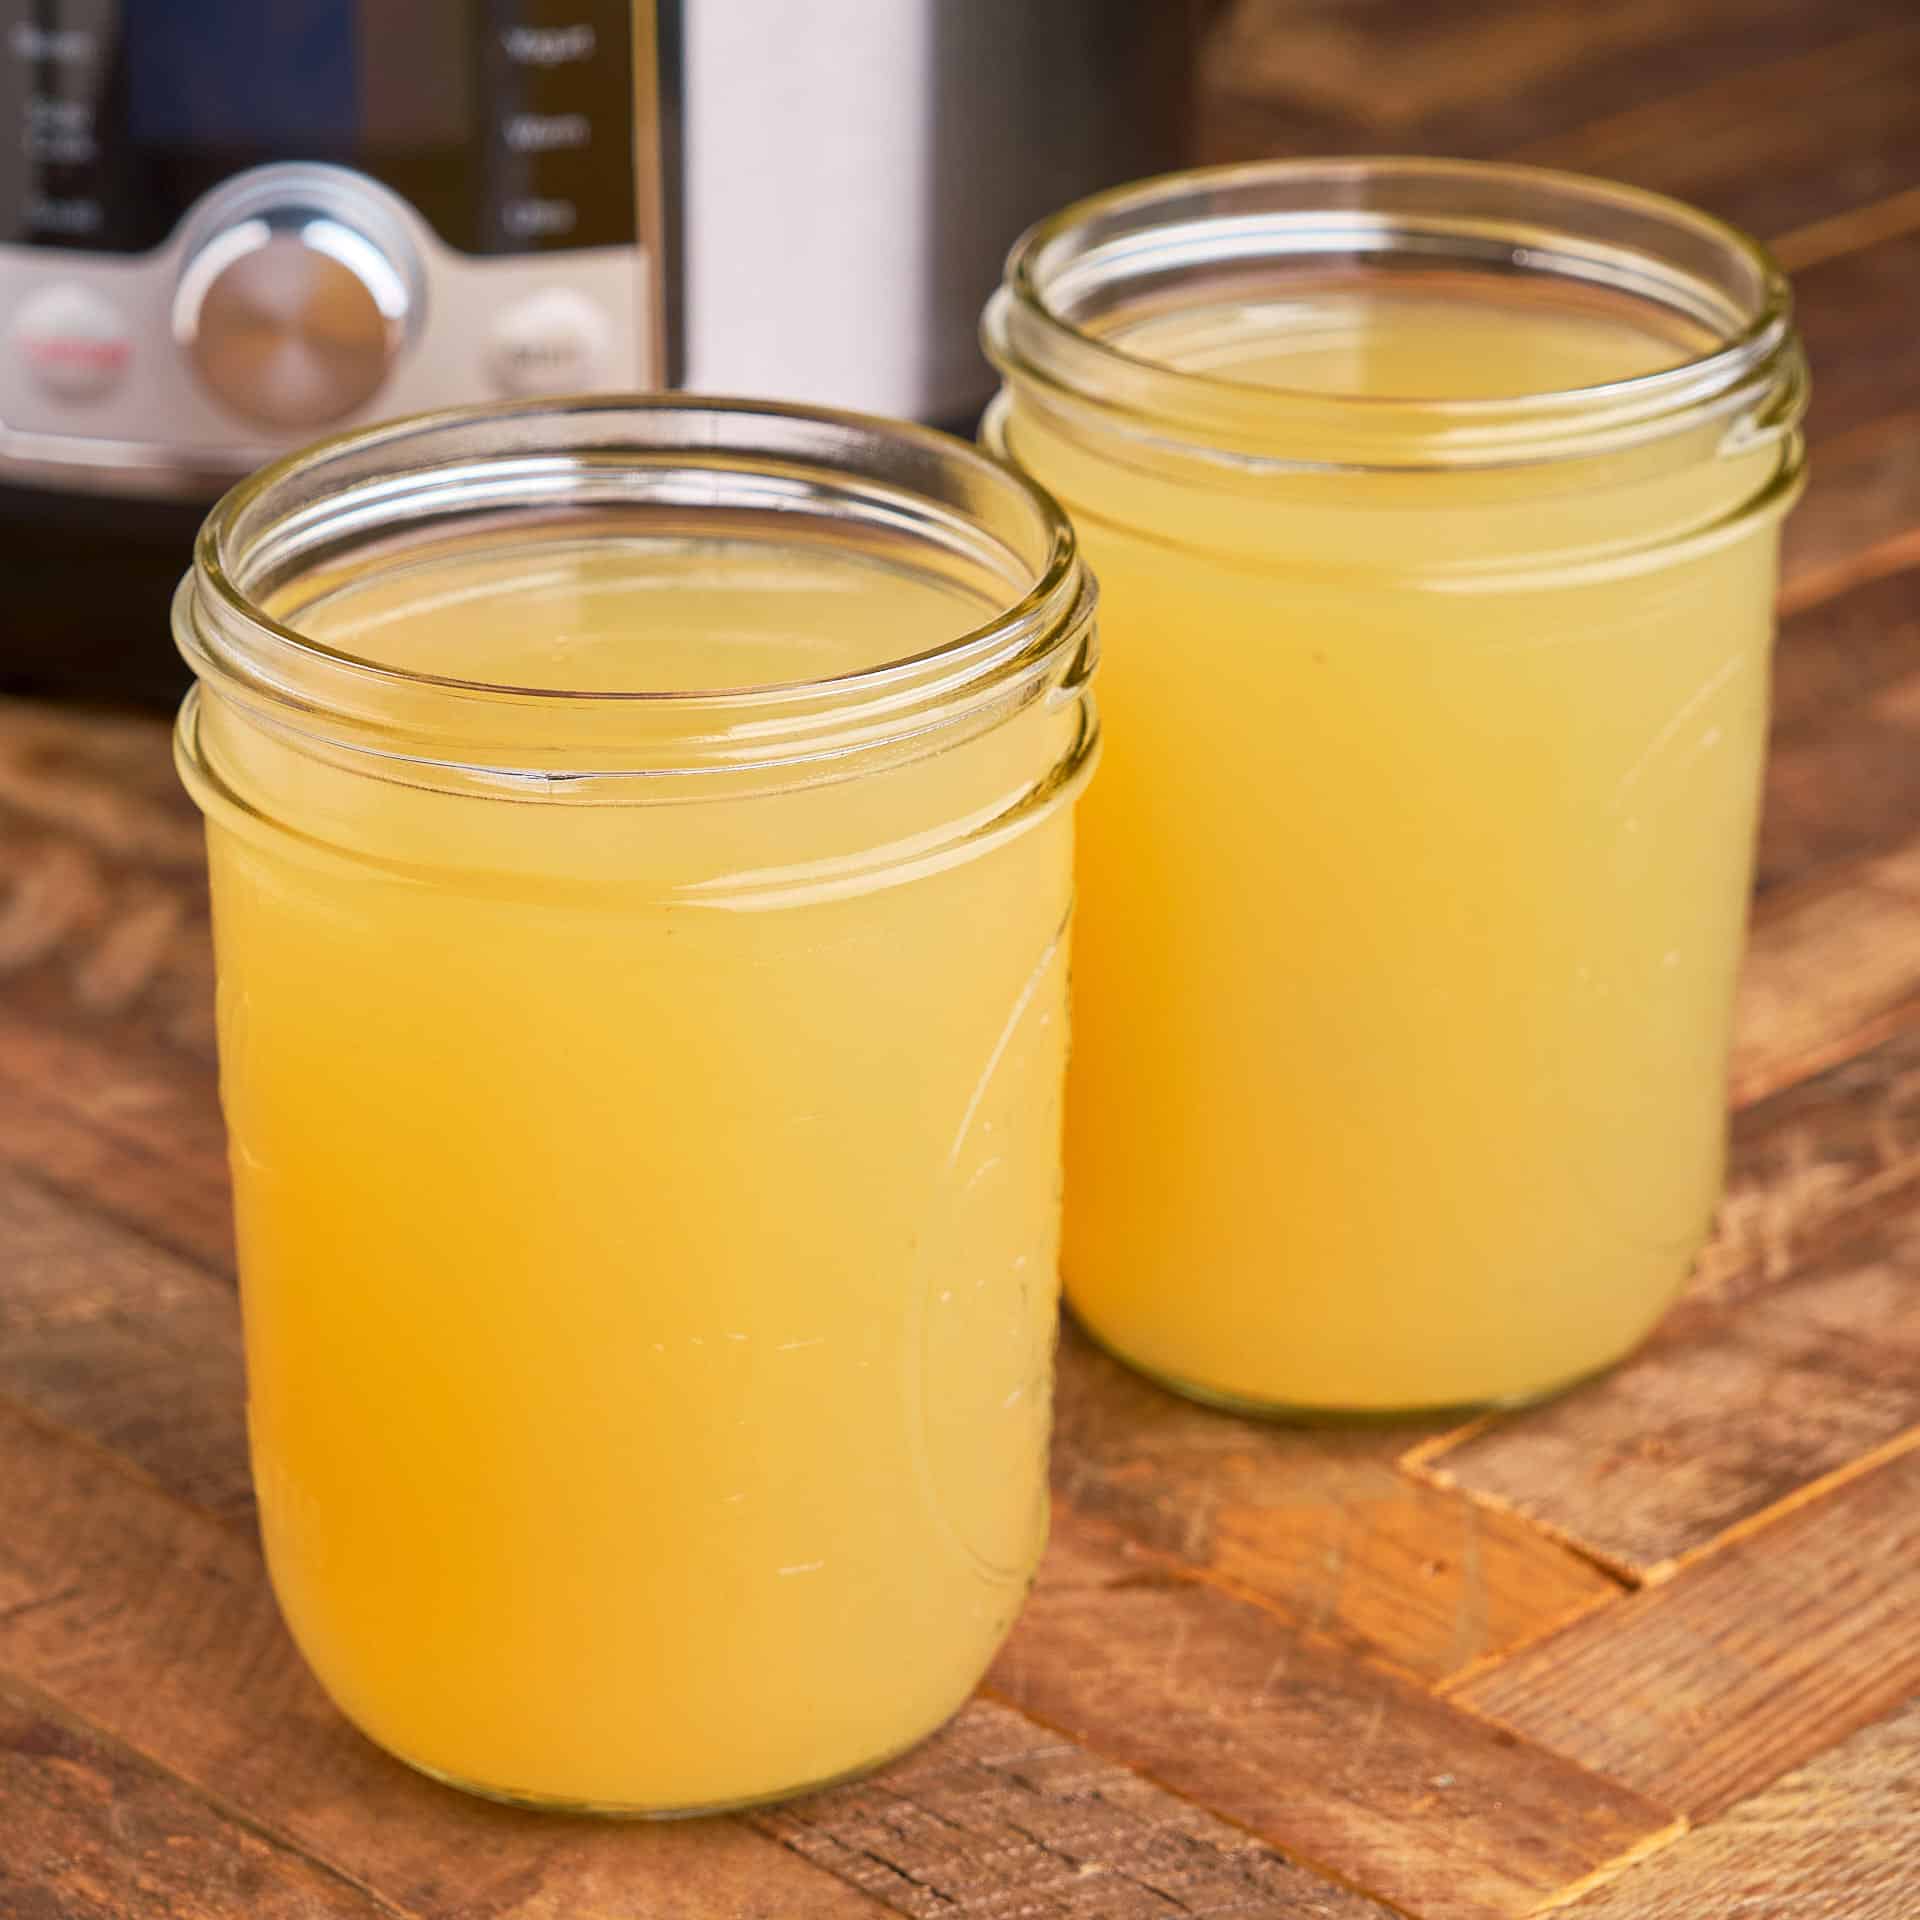 Two jars of chicken broth on a wood table in front of an Instant Pot